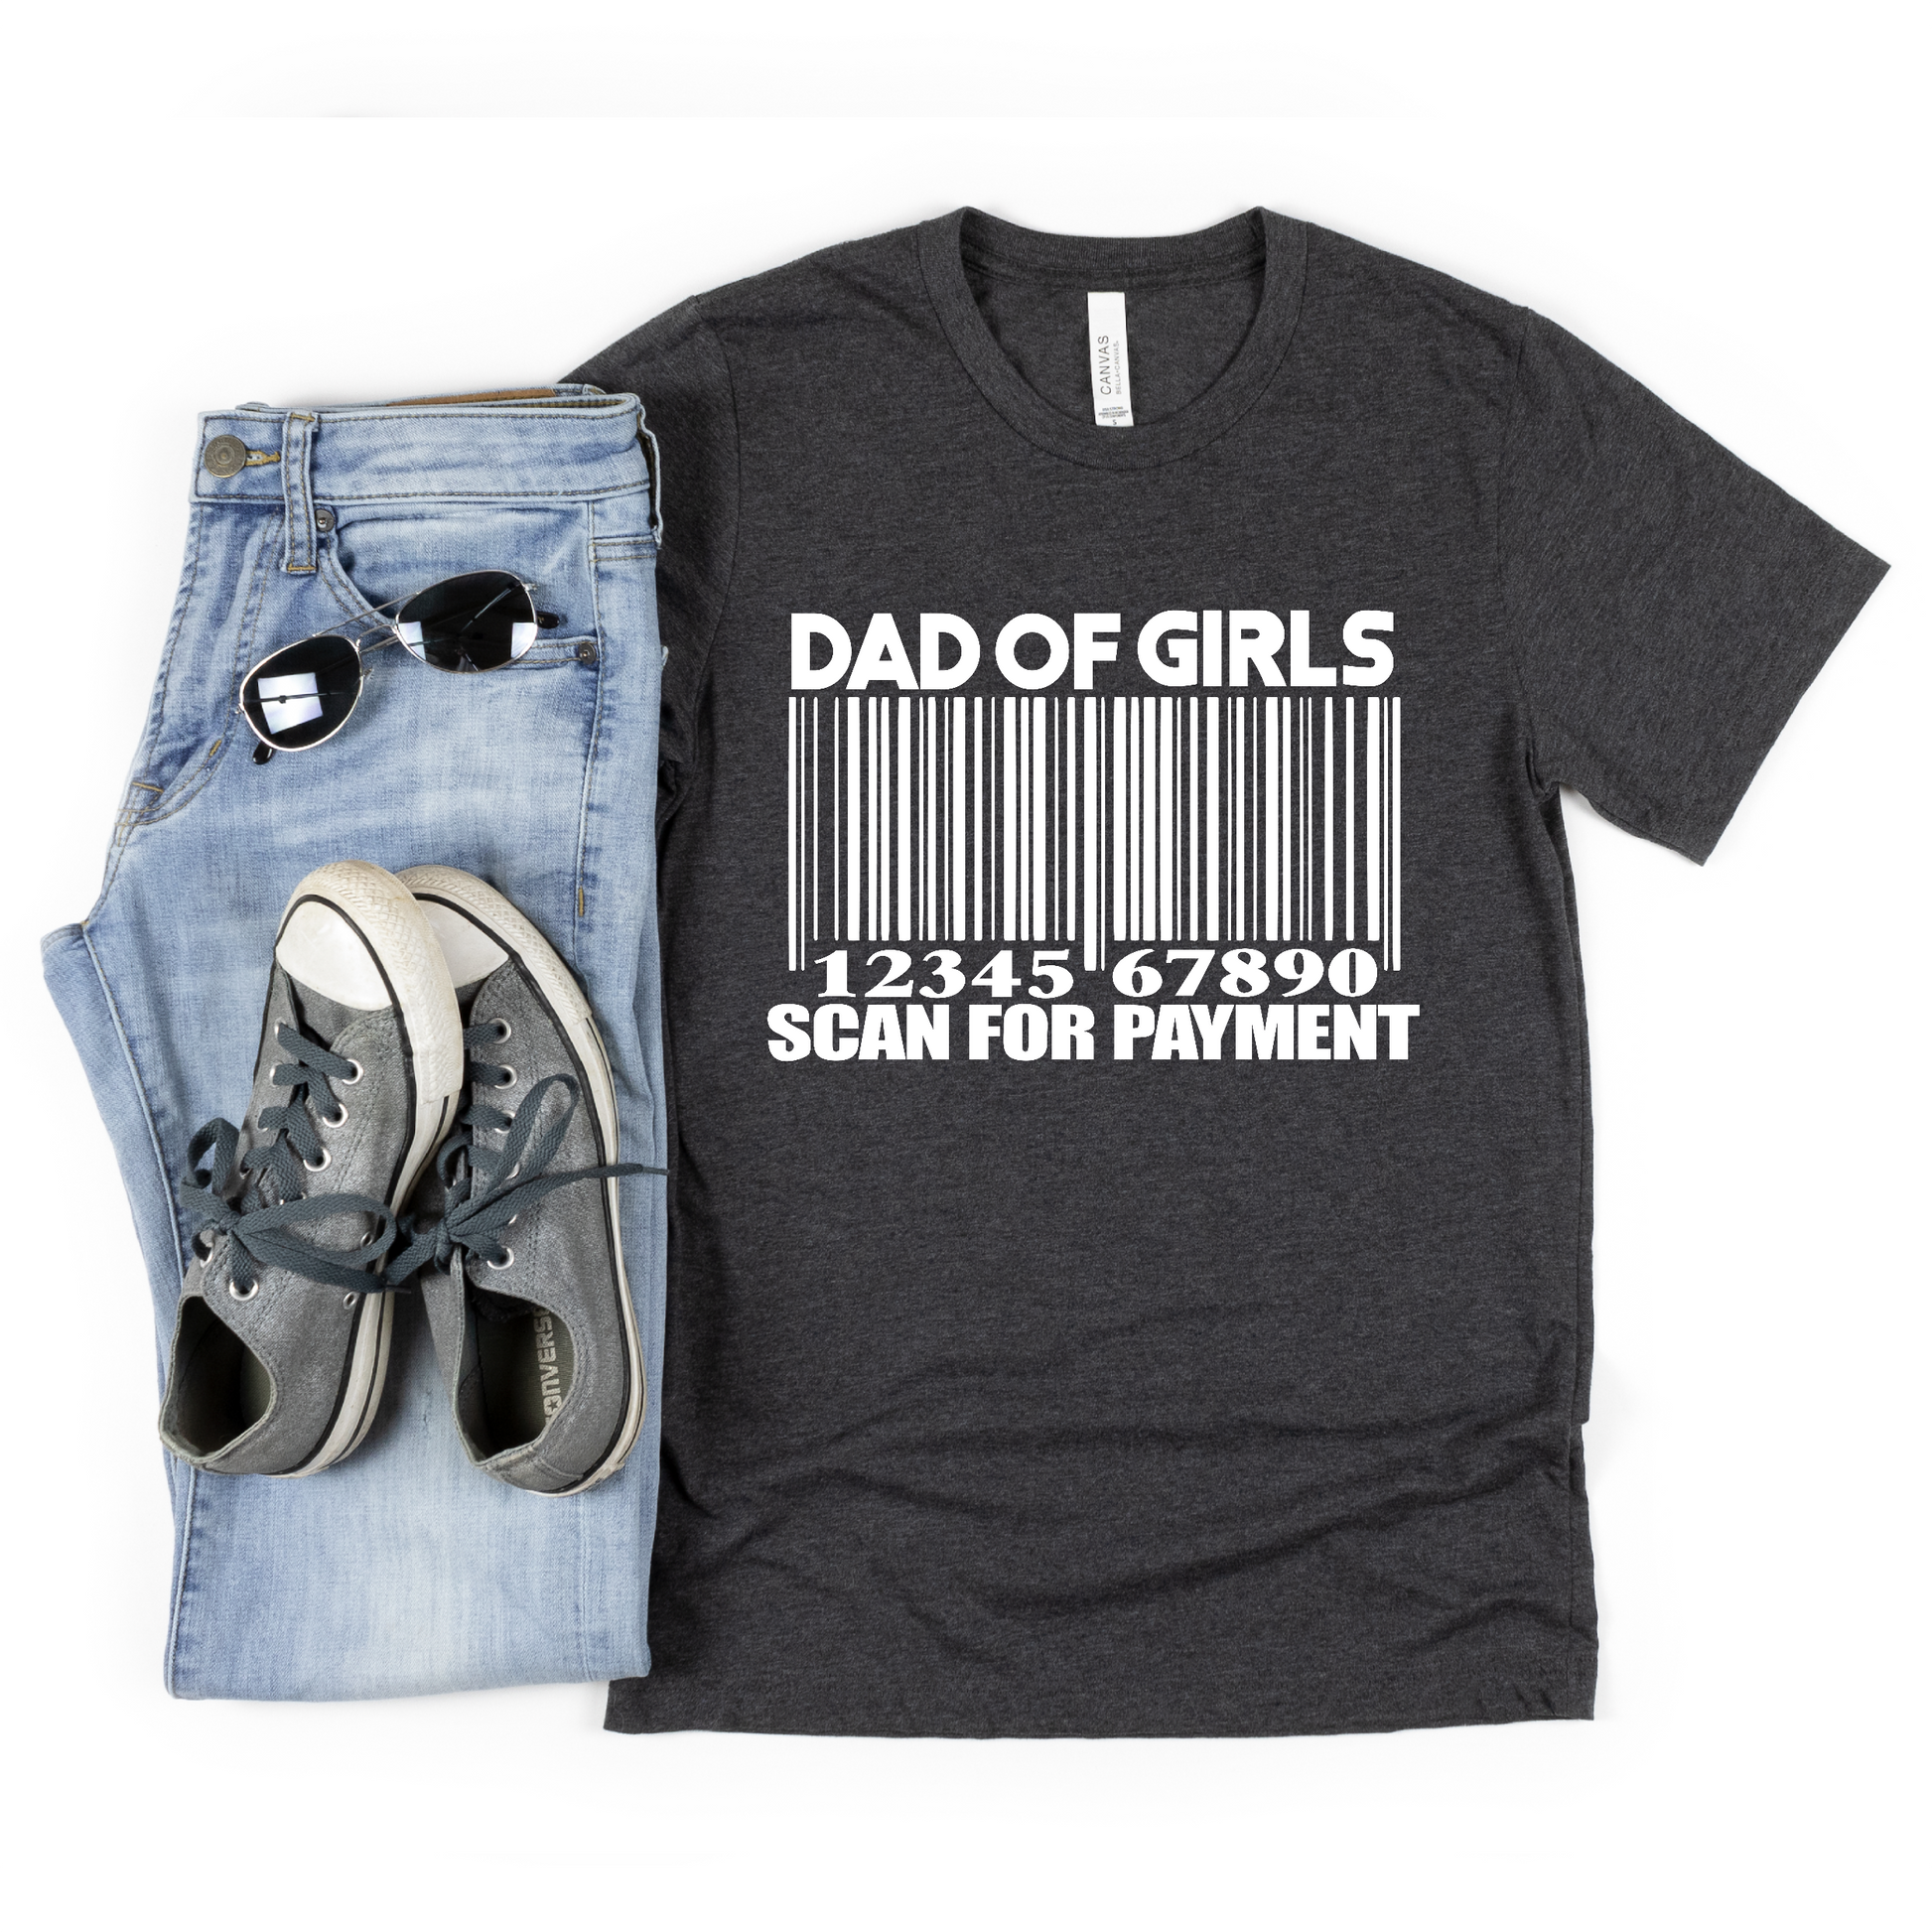 Dad of Girls Scan for Payment T-Shirt, Fathers Day Shirt, Funny